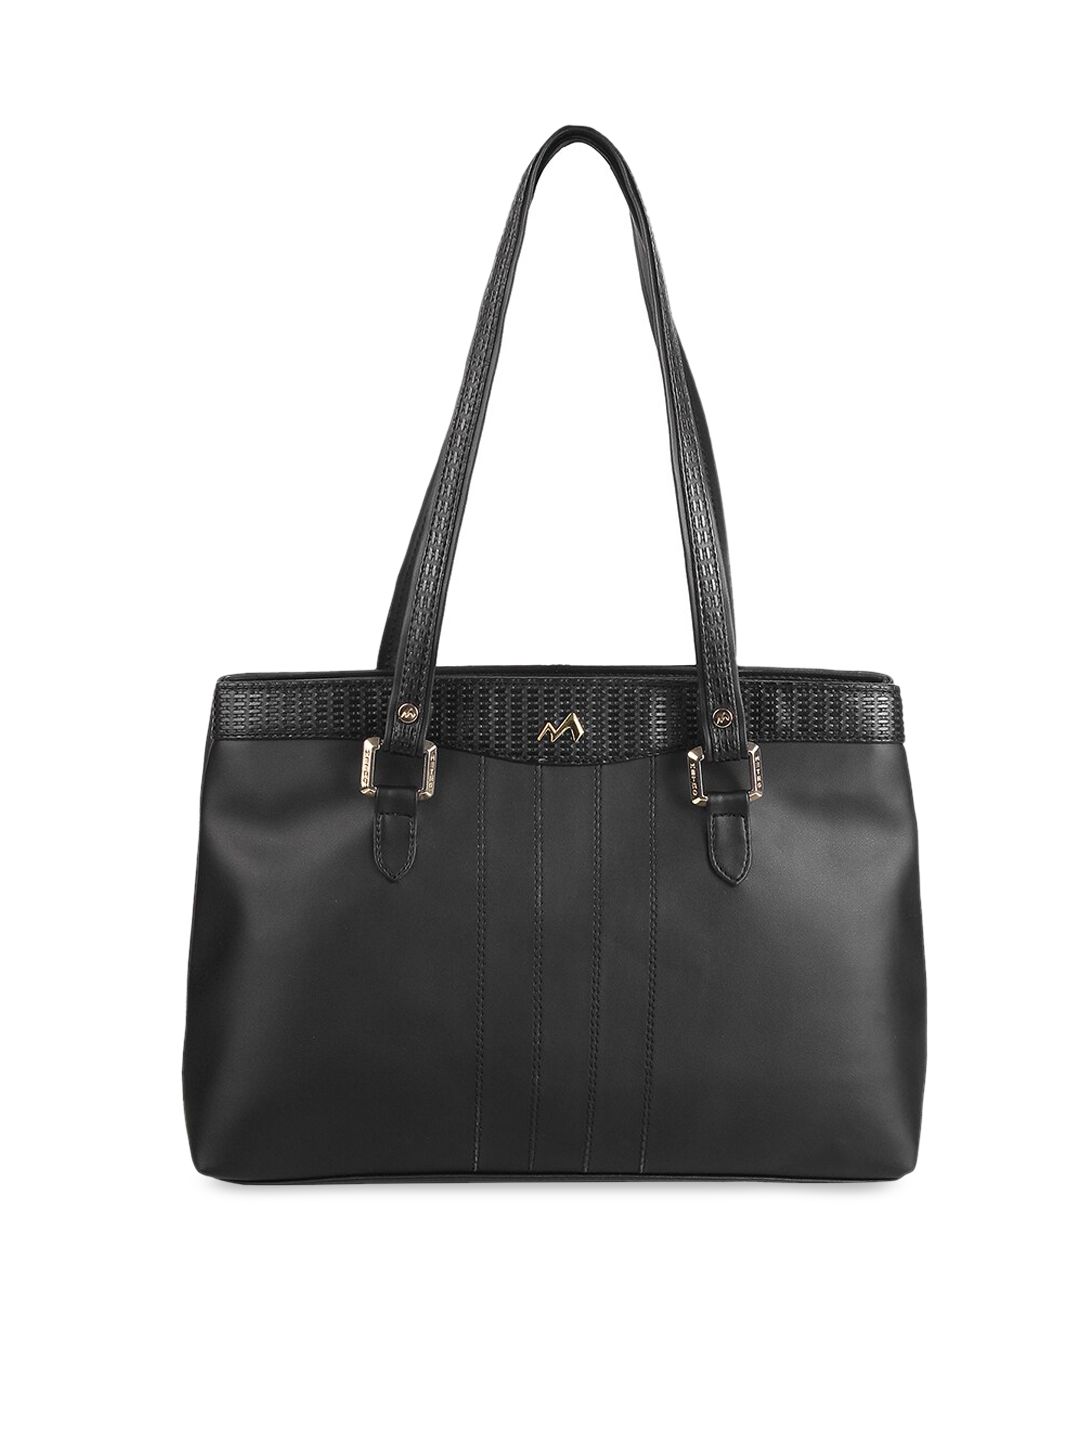 Metro Black Textured PU Oversized Structured Shoulder Bag Price in India